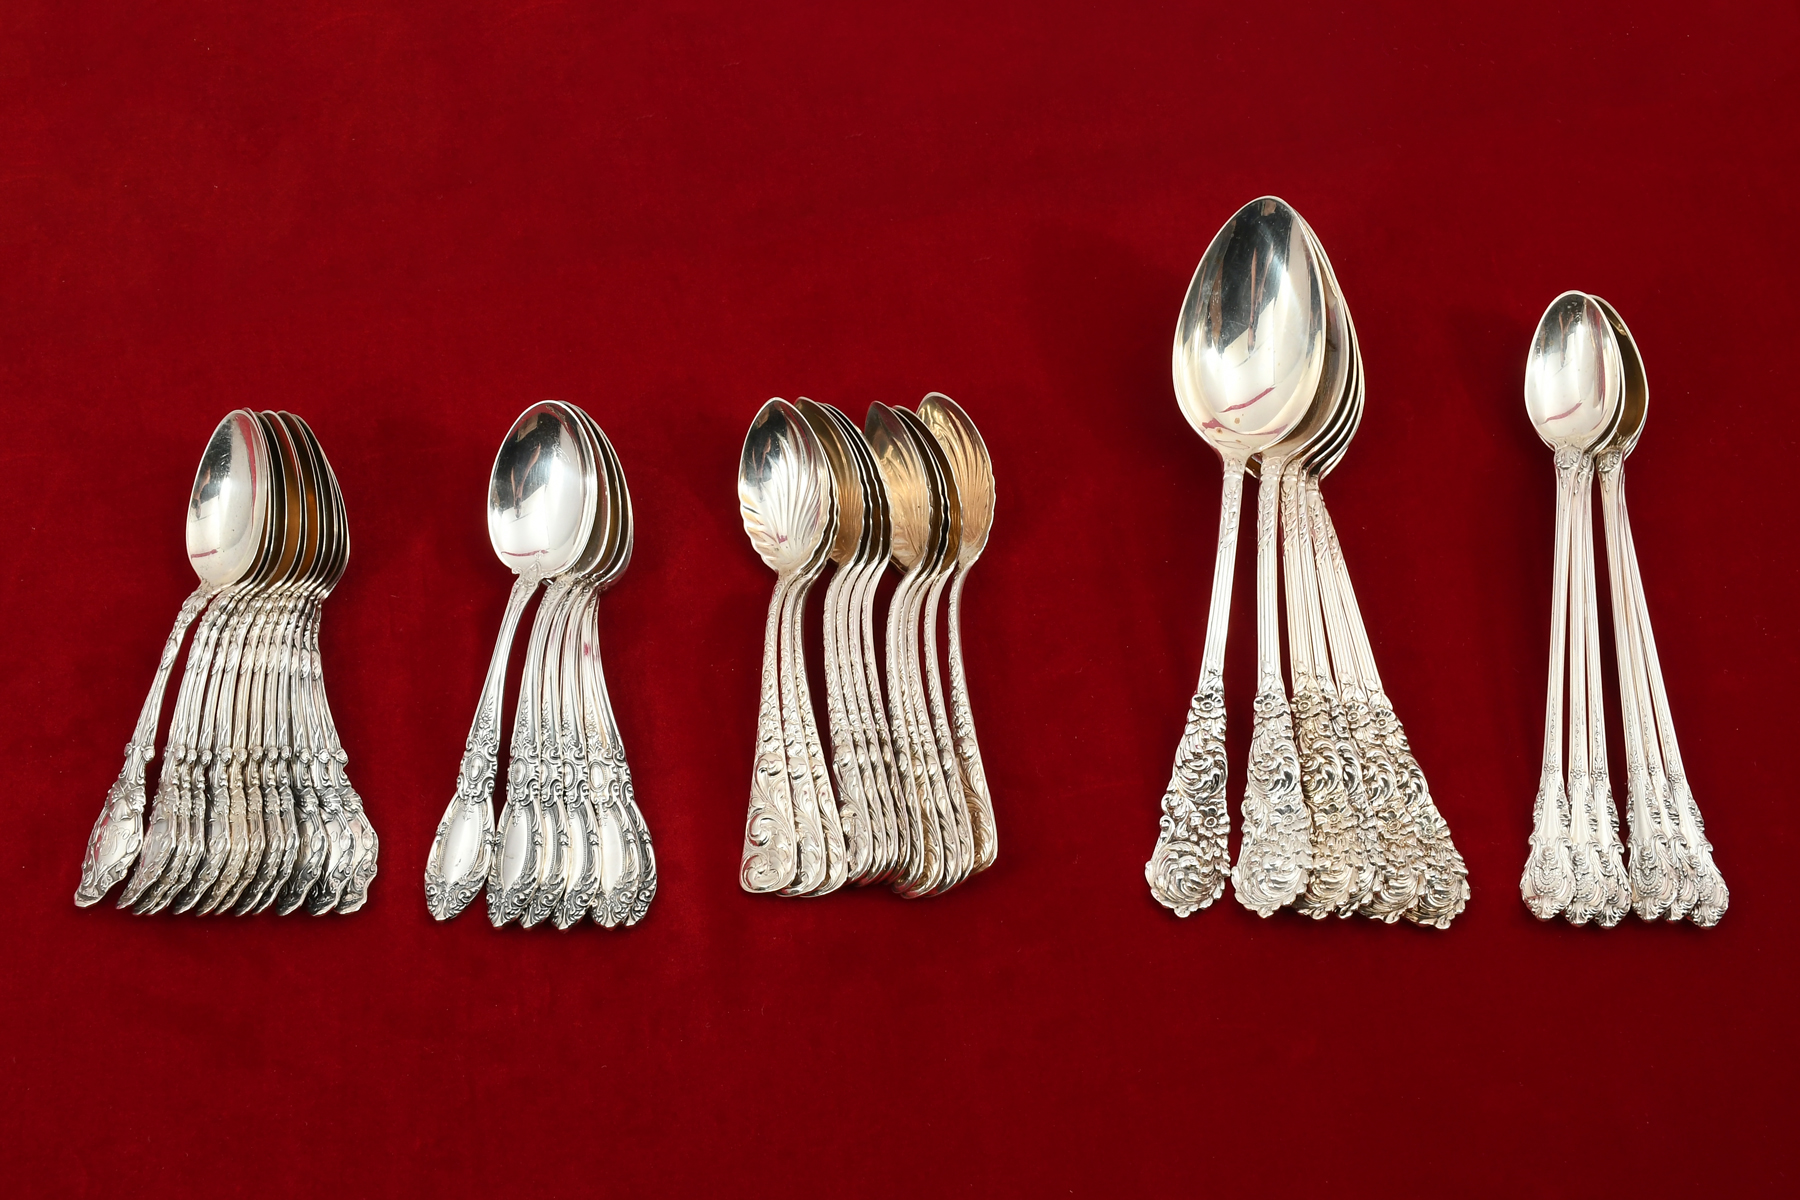 5 SETS OF ORNATE STERLING SPOONS: